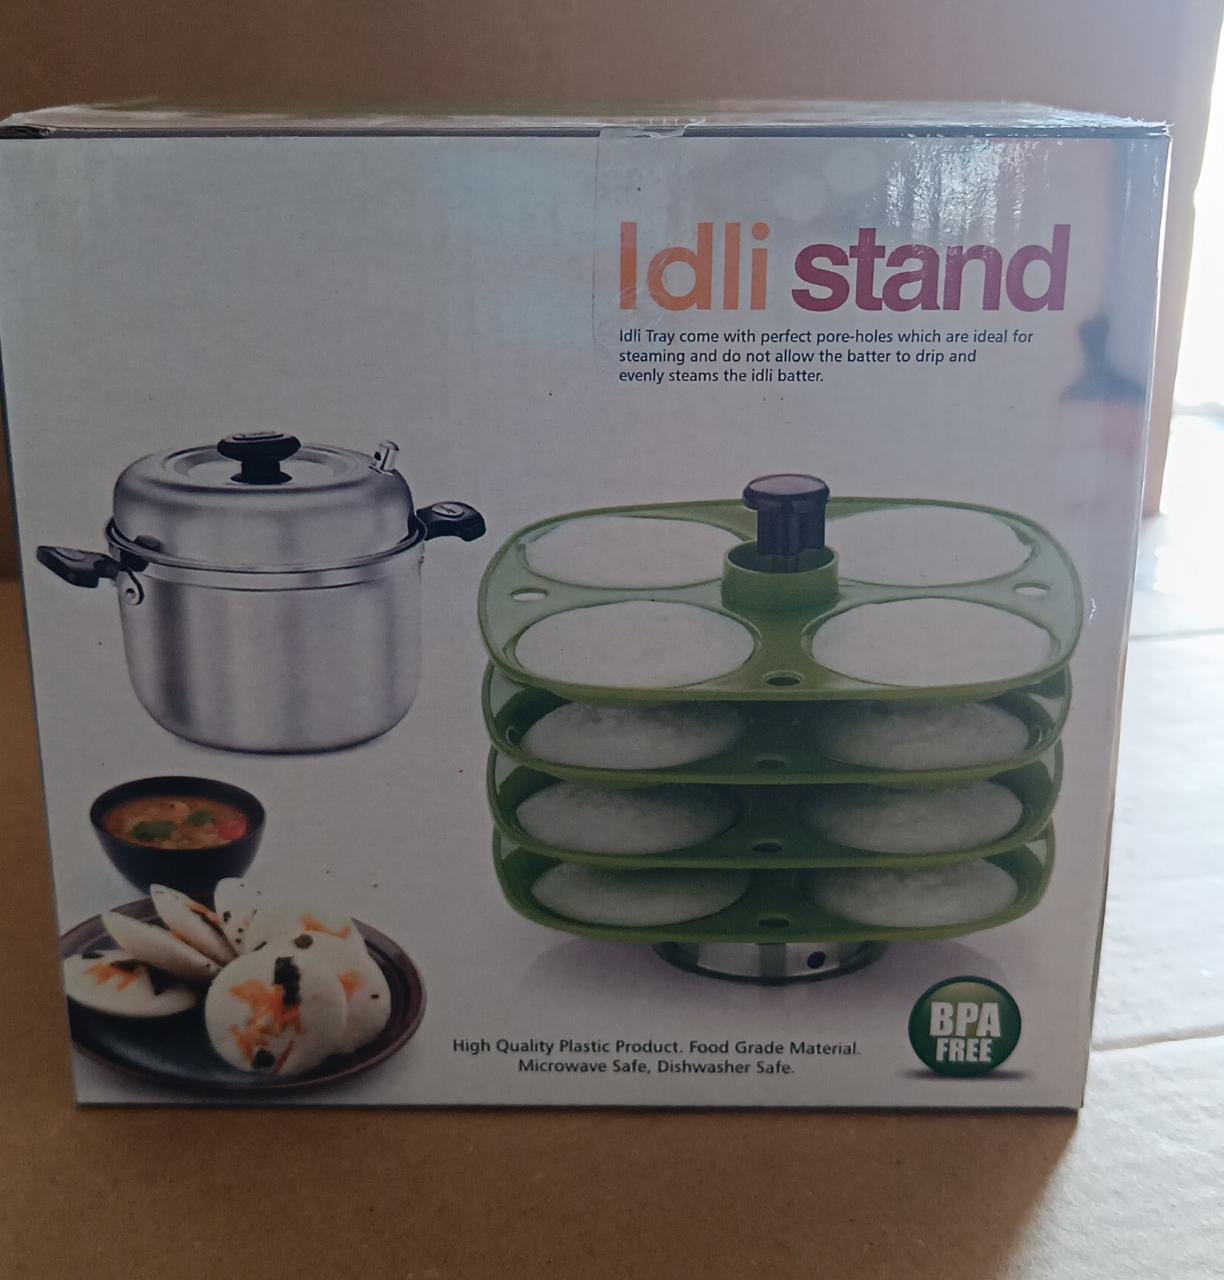 3 Layer Idli Stand used in all kinds of household kitchen purposes for holding and serving idlis.